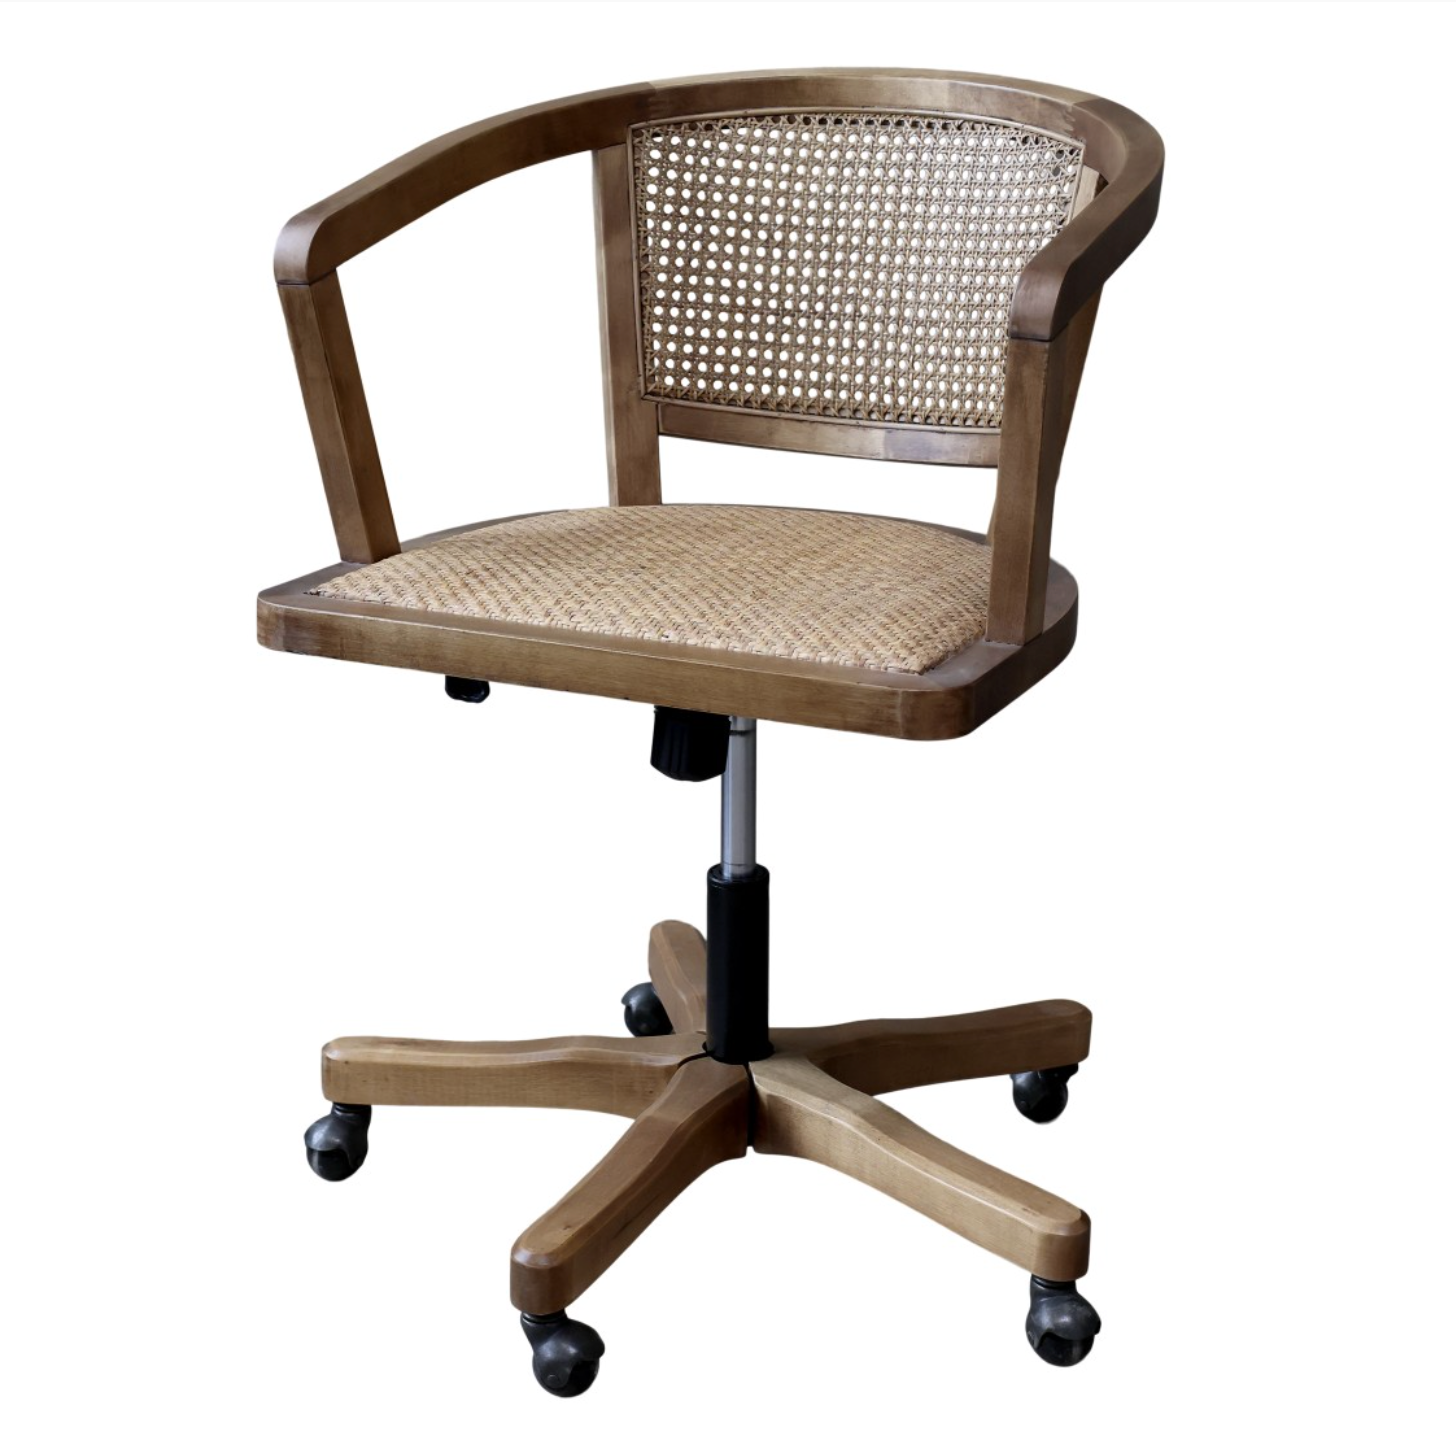 Wooden office chair.